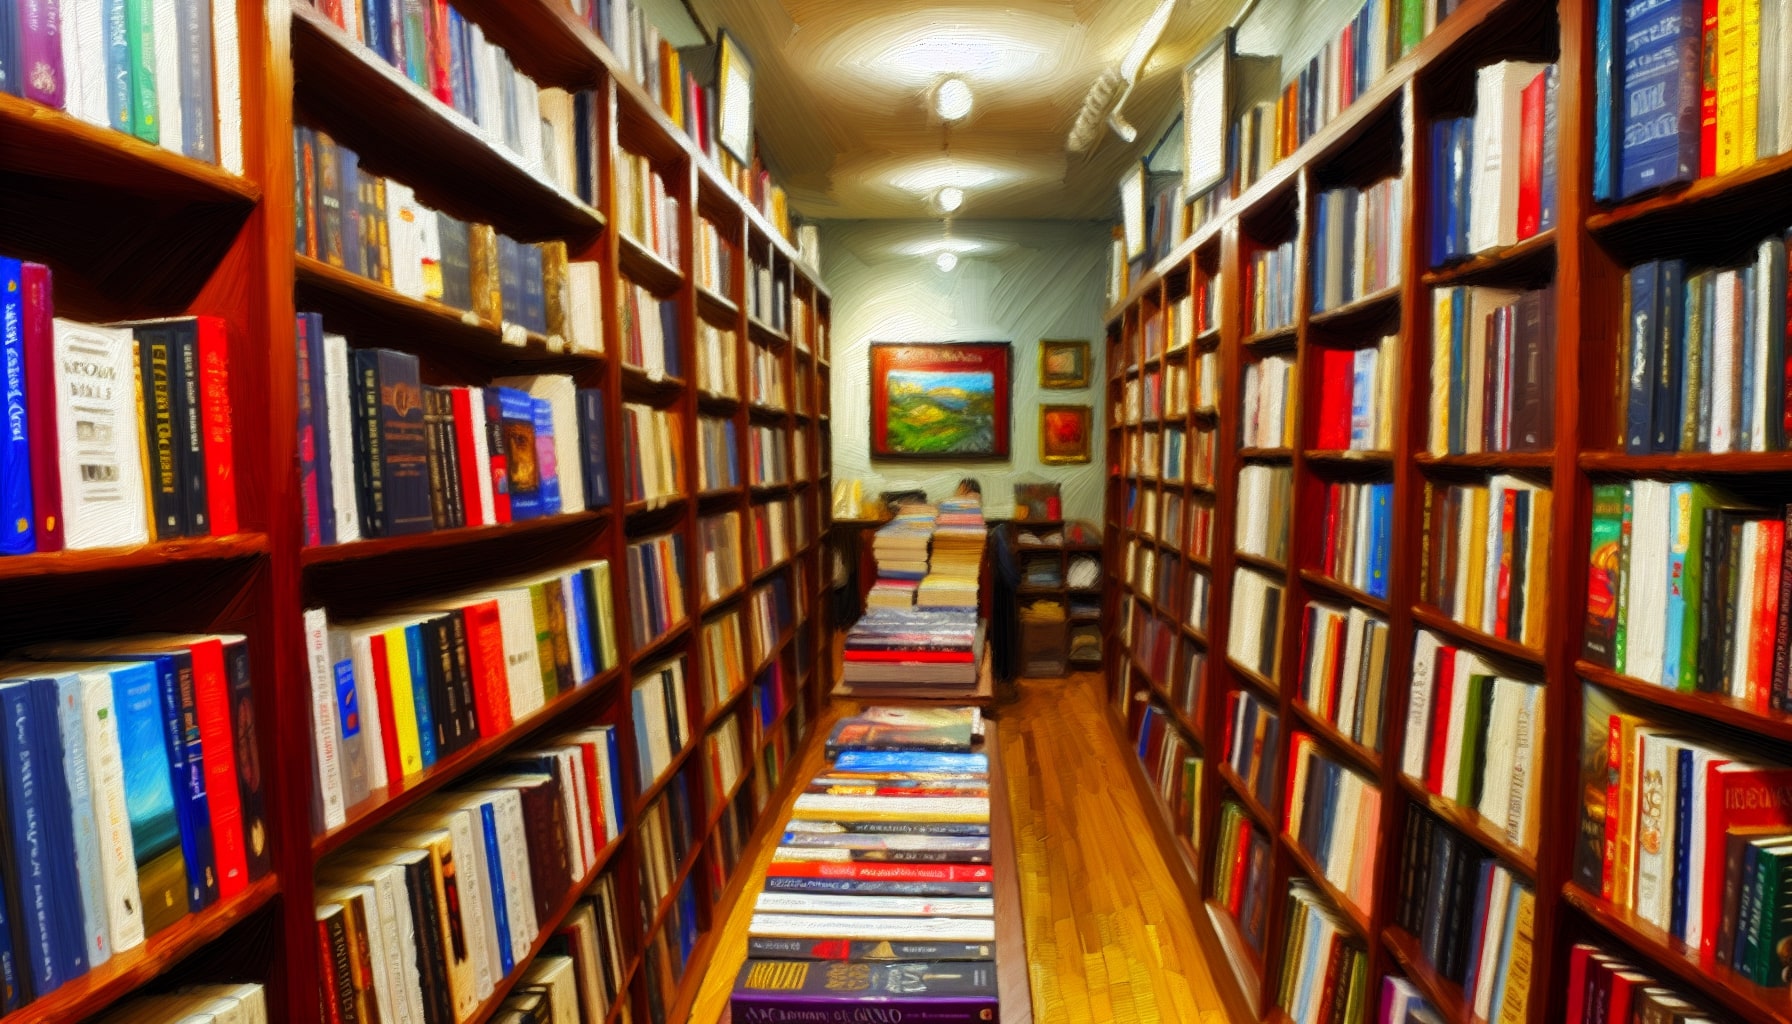 Diverse selection of books on shelves in a bookstore